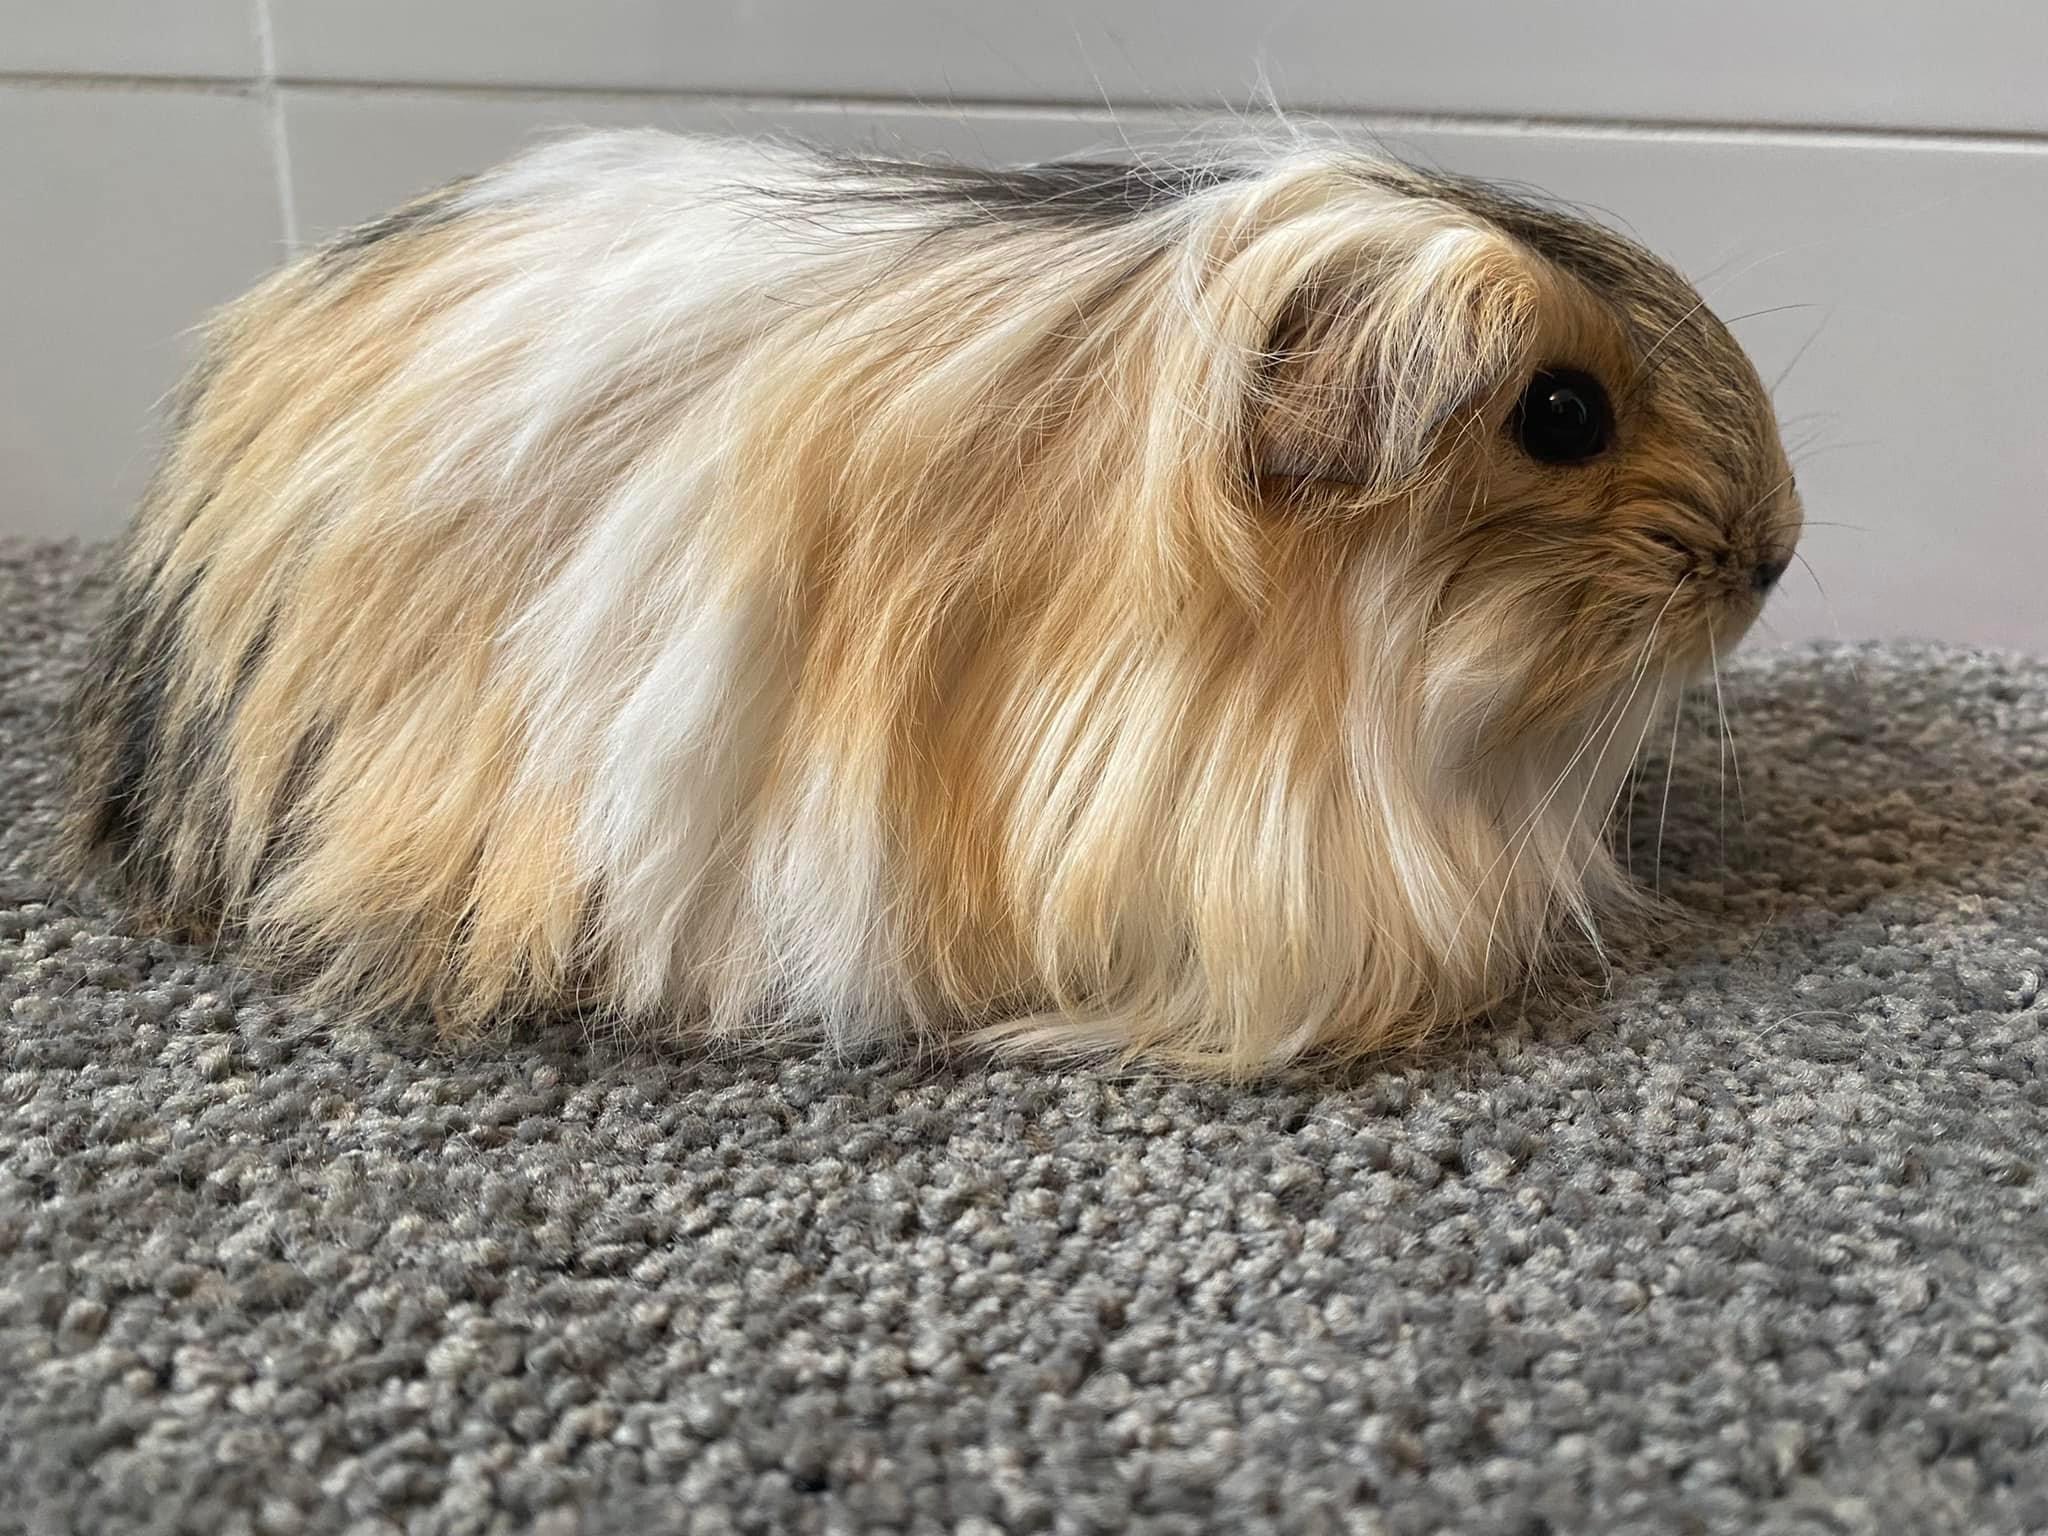 Guinea Pigs for sale